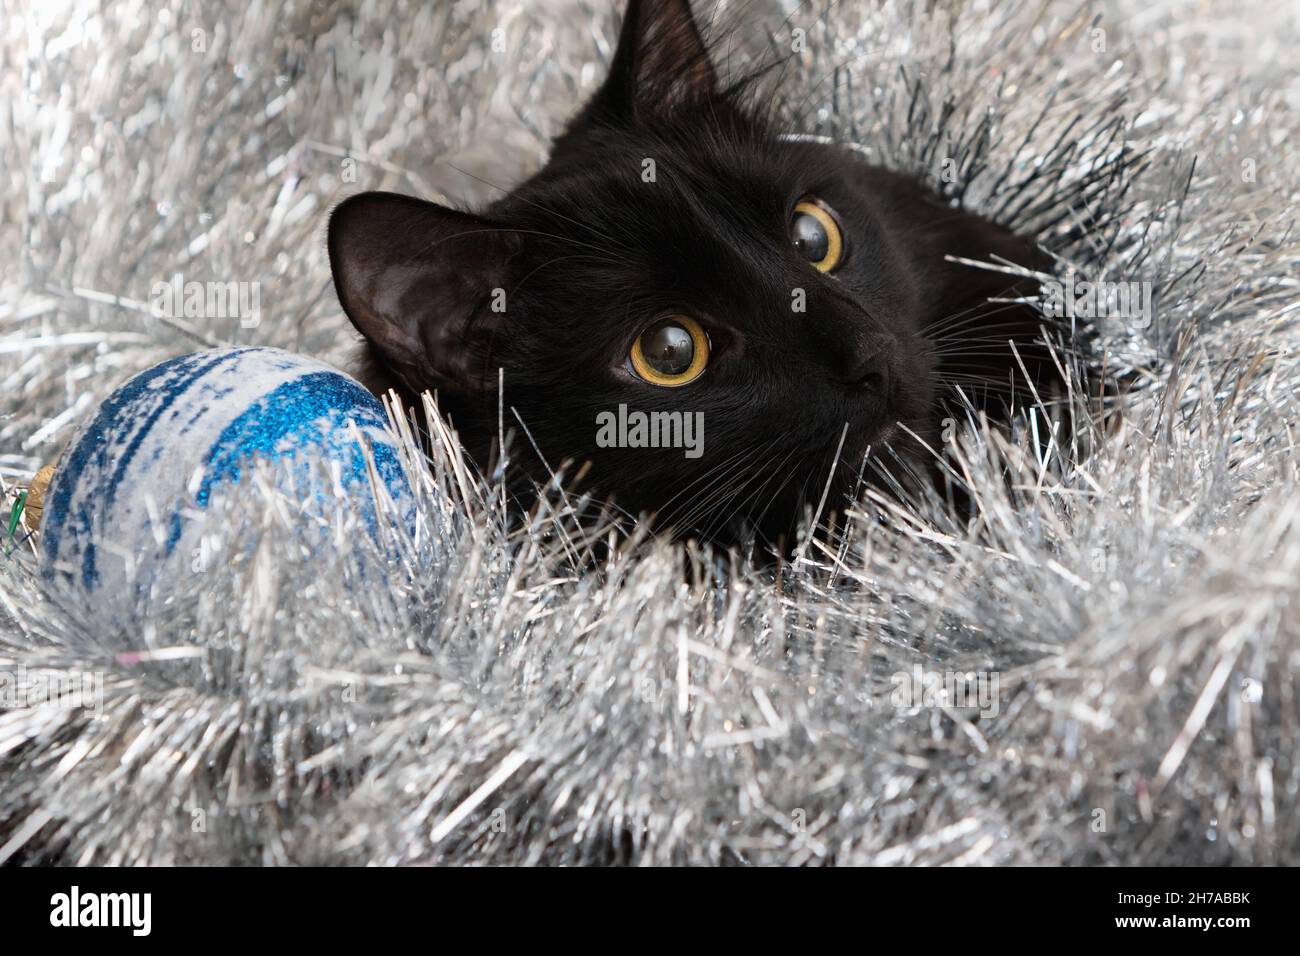 New Year's portrait of a cat in festive decorations. Stock Photo